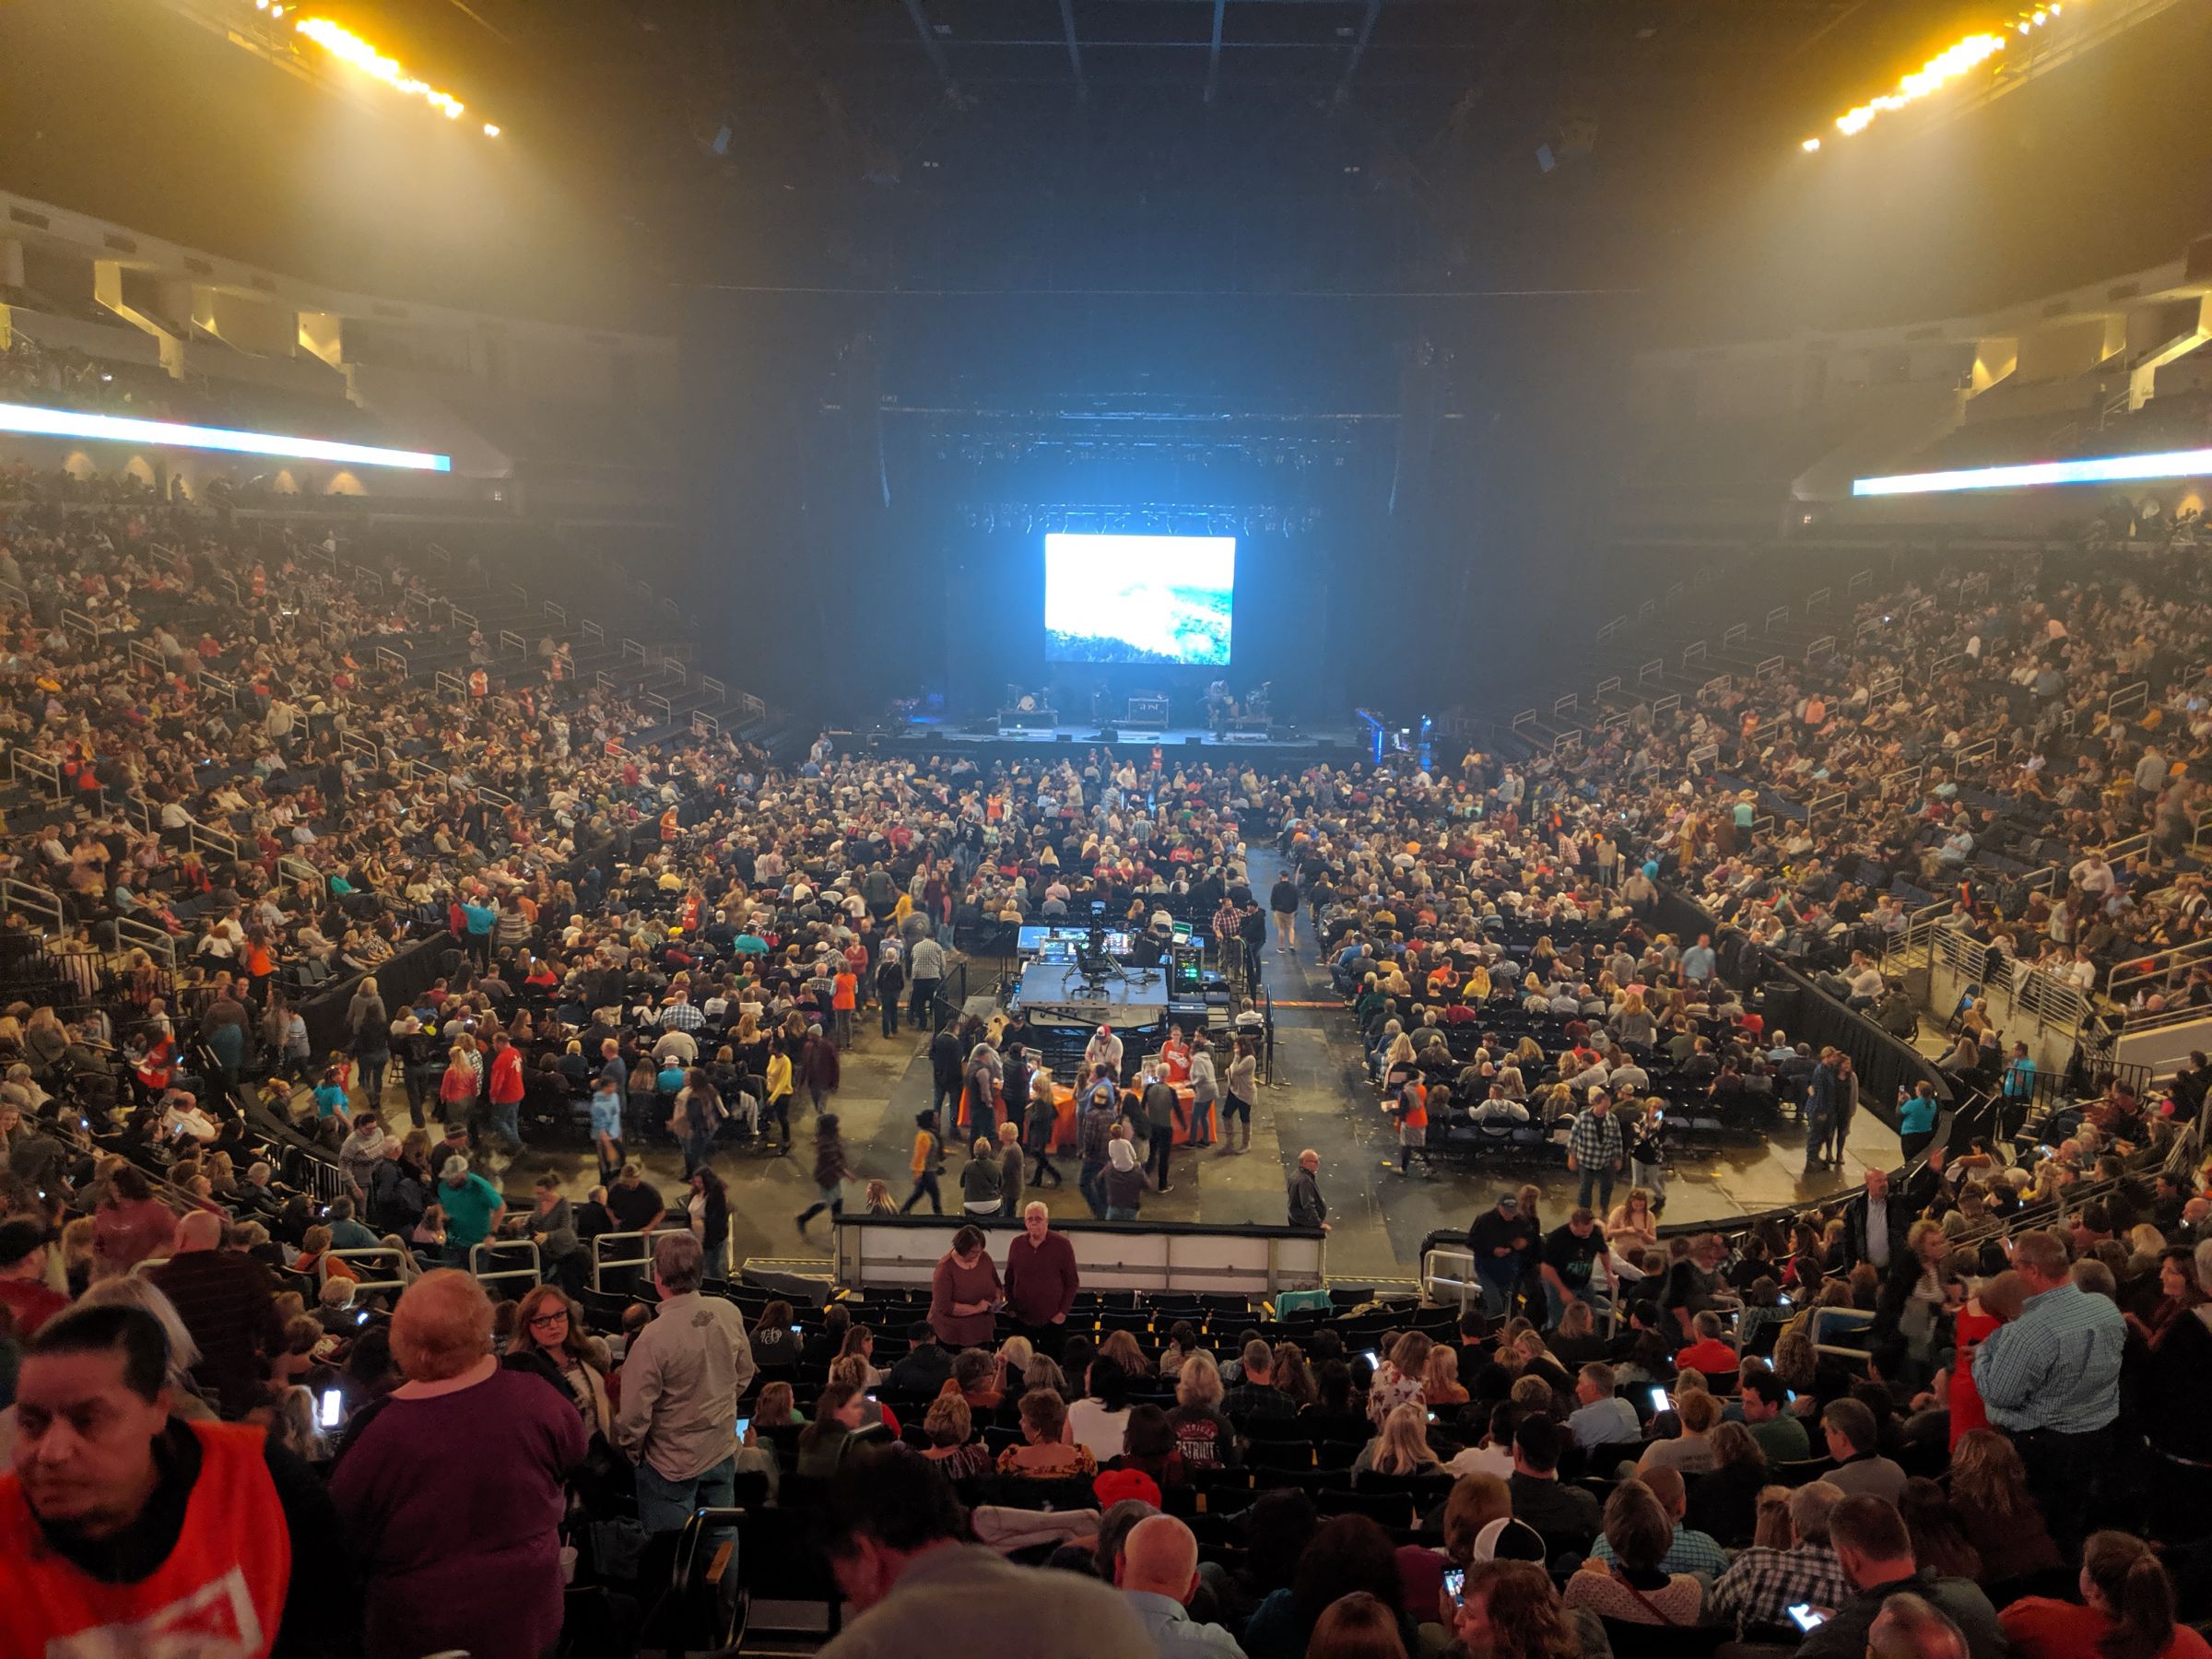 section 101, row w  seat view  - gas south arena